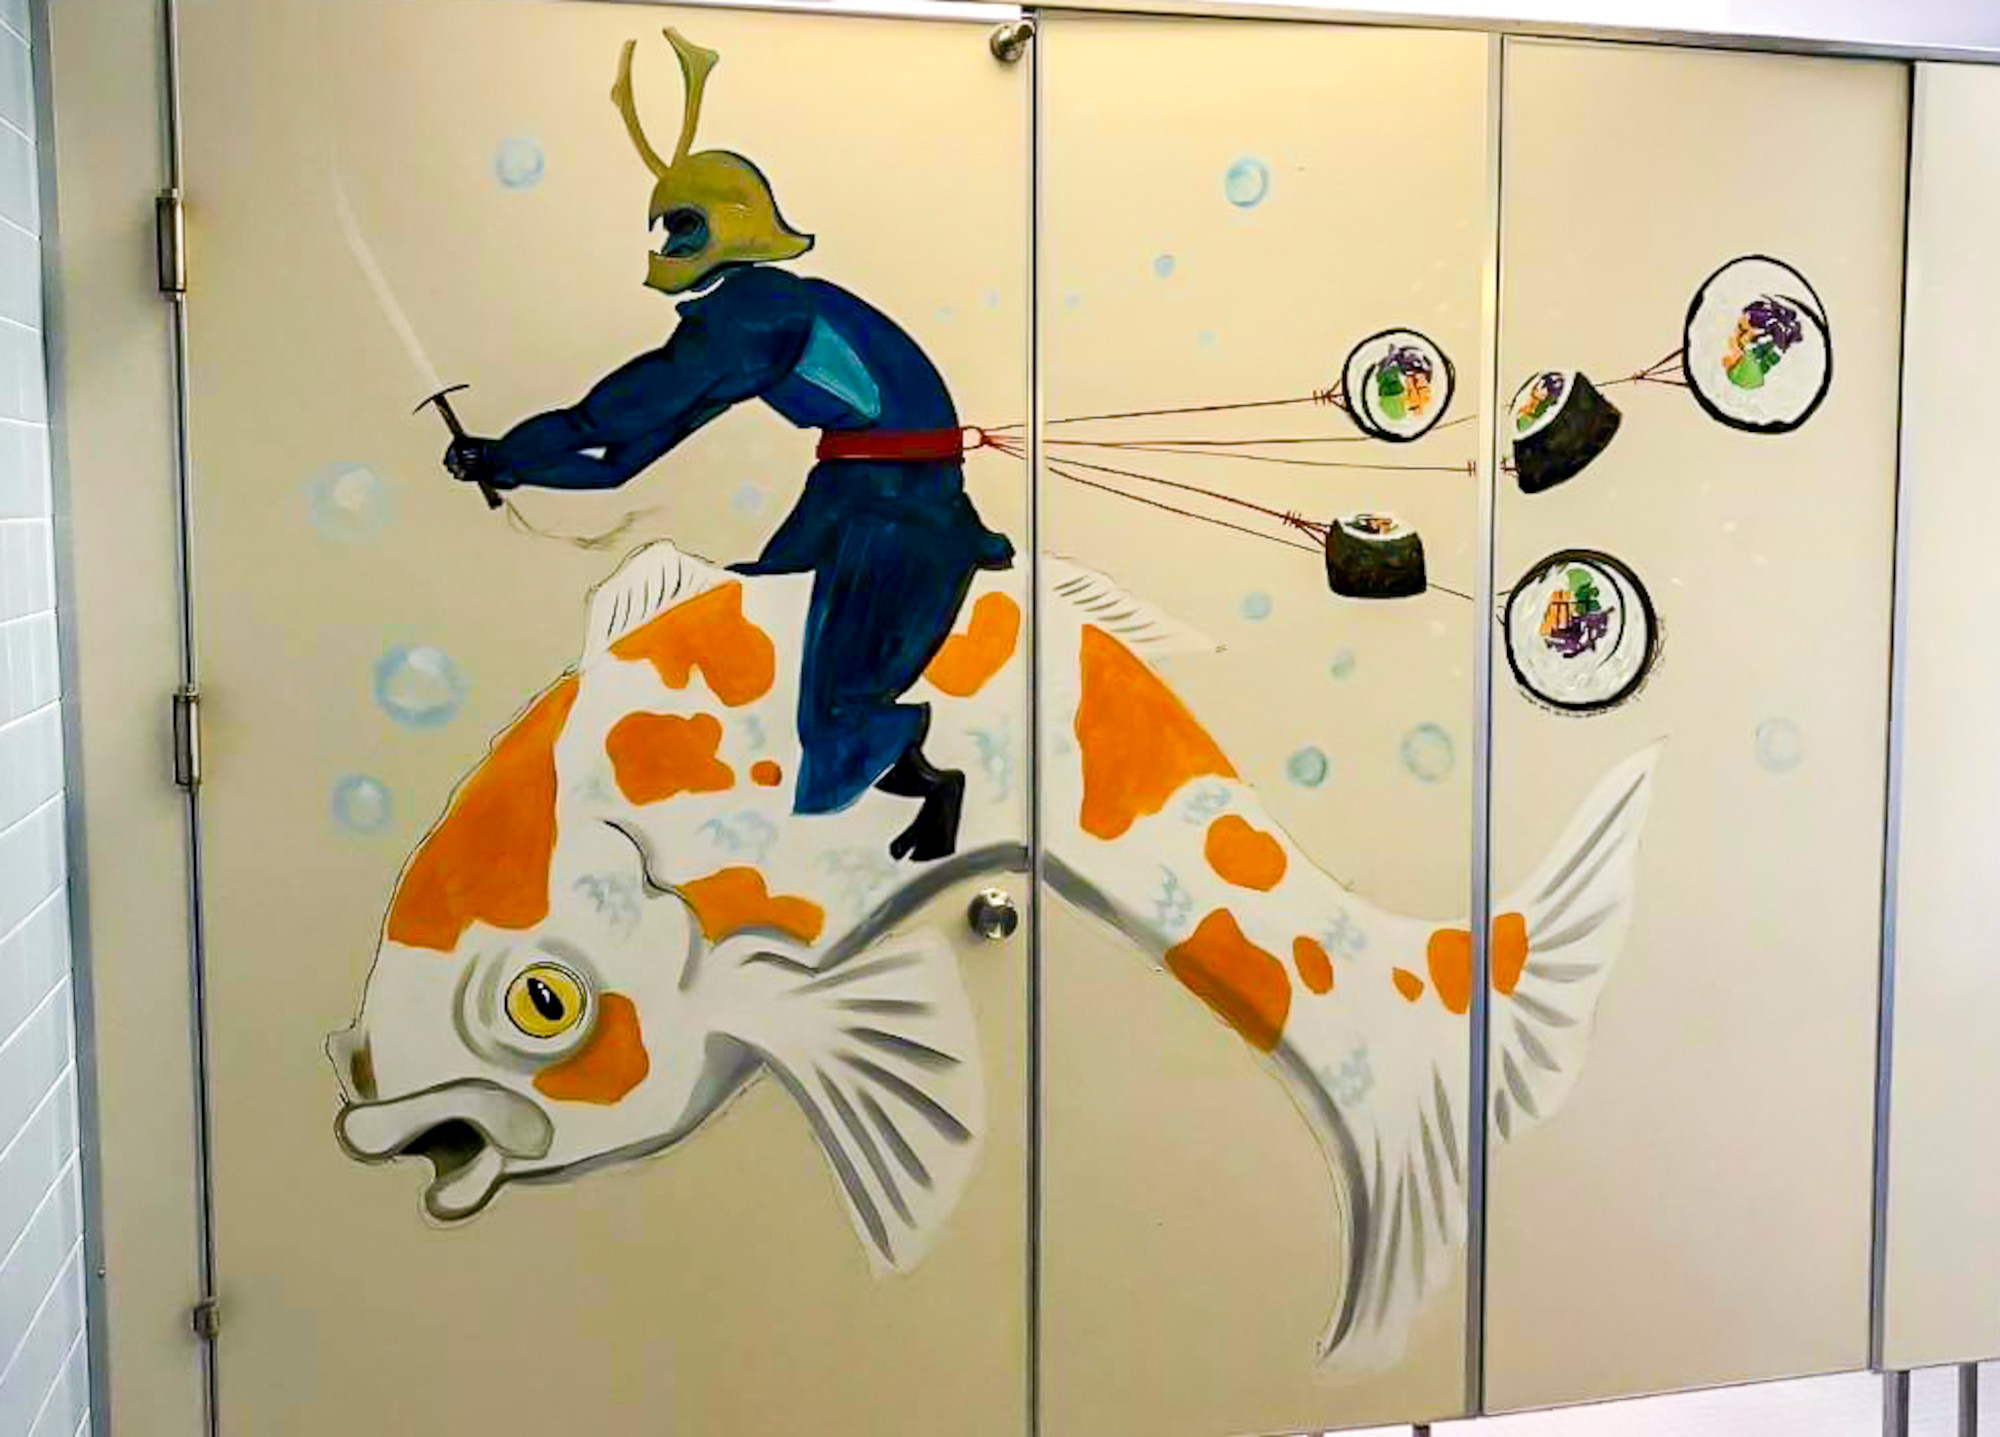 Sharon Smith, the wife of Maj. Brian Smith, a physical therapist with the 35th Medical Operations Squadron, paints a samurai in Edgren High School at Misawa Air Base, Japan, in 2018. The five sushi pieces represent her five children, while the samurai and Koi fish represent her favorite things about Japan. She shares her creativity to create morale and joy with other Team Misawa members. (Courtesy photo by Sharon Smith)